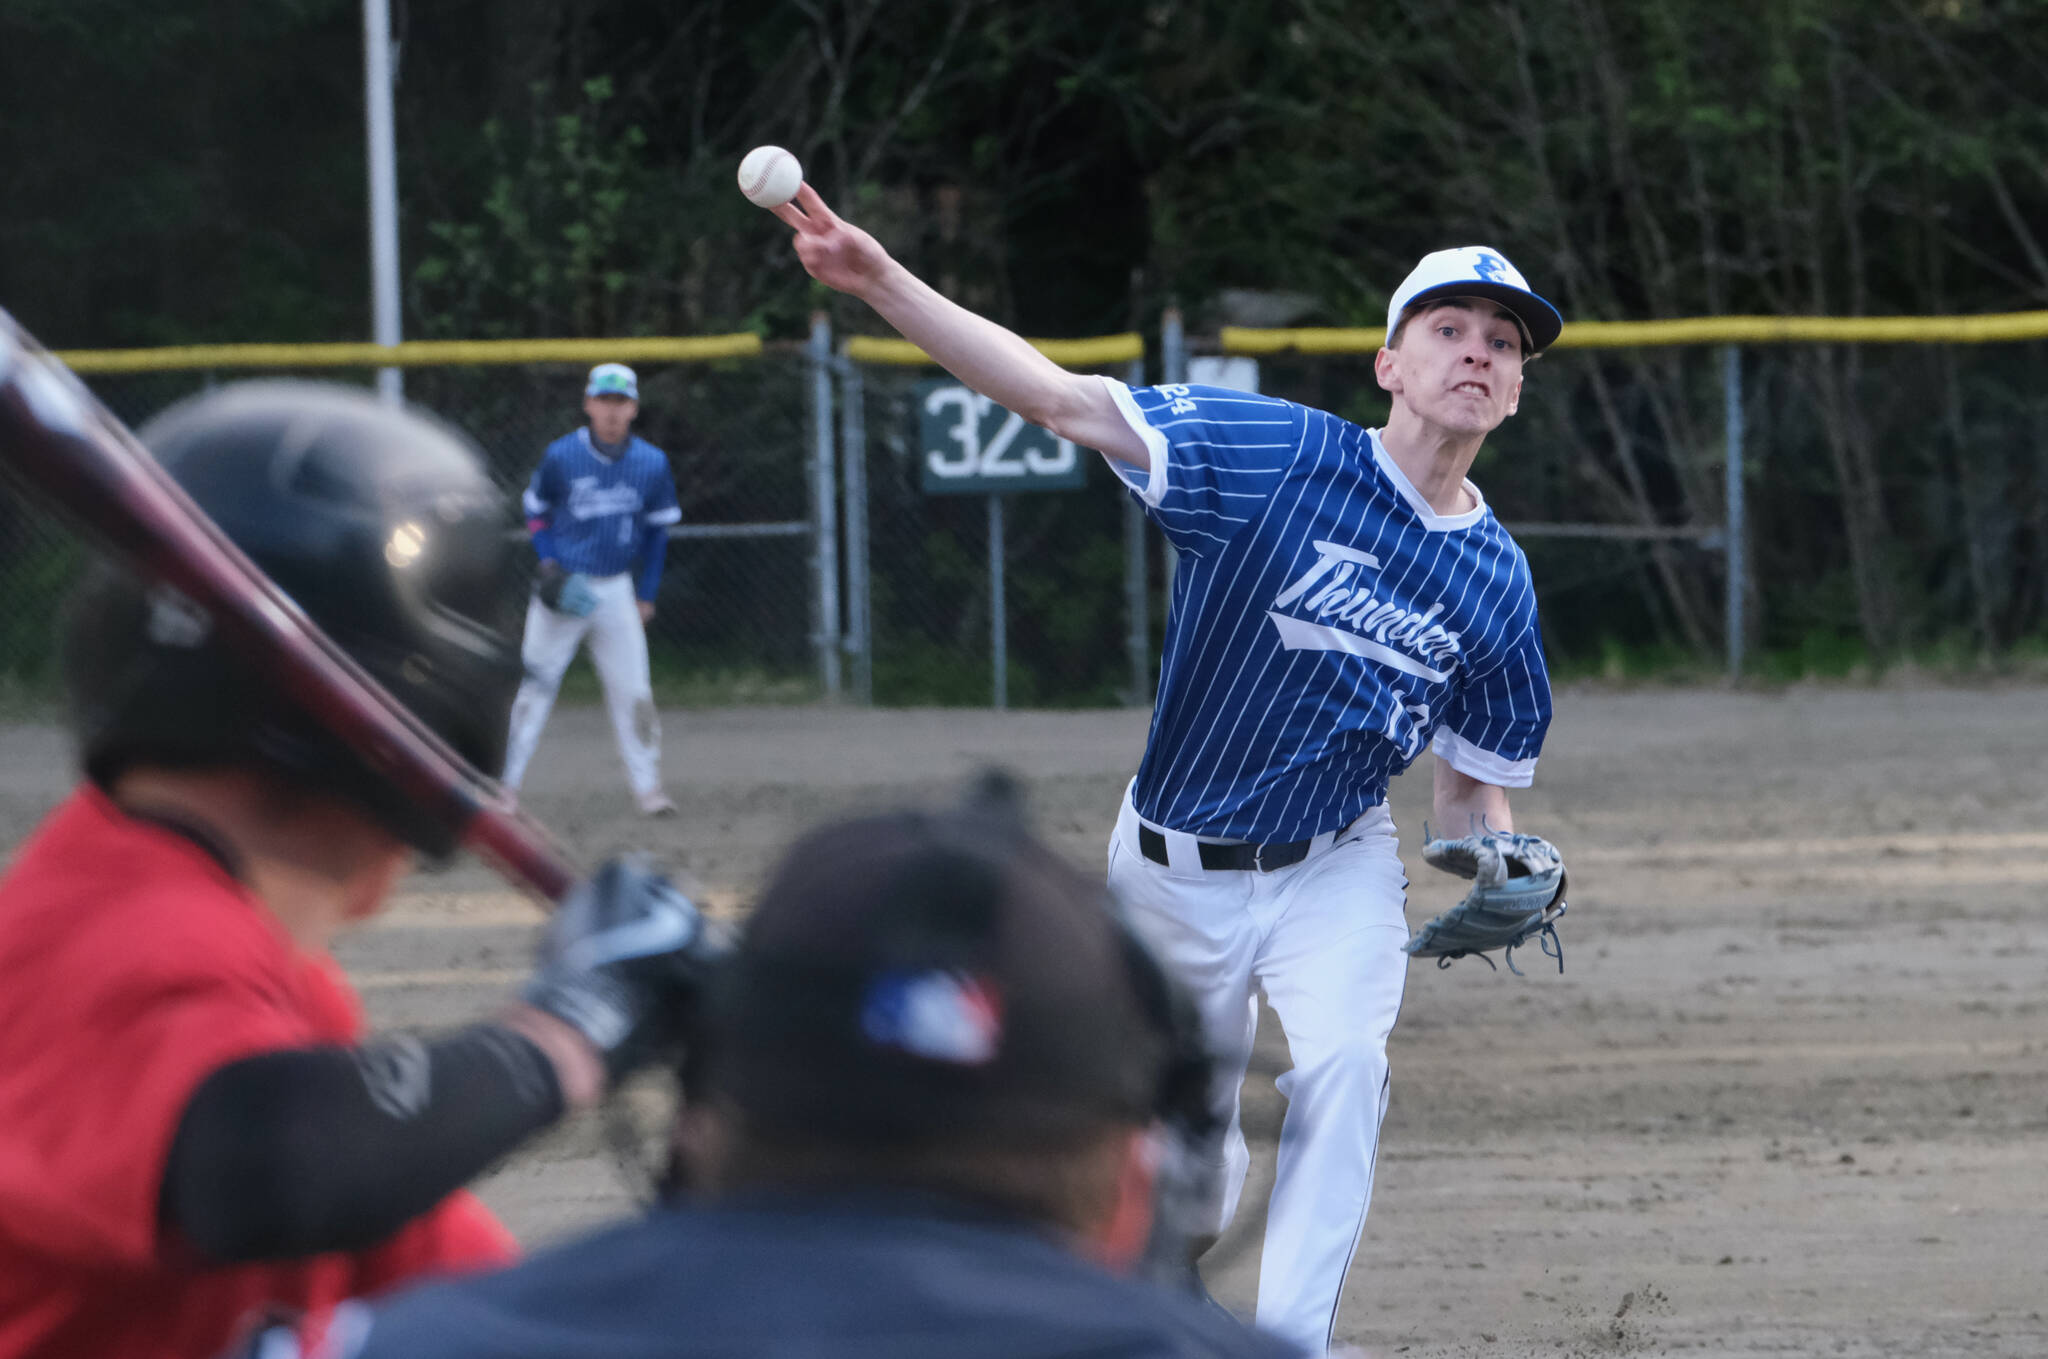 Thunder Mountain High School senior Kasen Ludeman delivers against a Juneau-Douglas High School: Yadaa.at Kalé batter during the Falcons 4-0 win over the Crimson Bears on Friday at Adair-Kennedy Field. (Klas Stolpe / For the Juneau Empire)